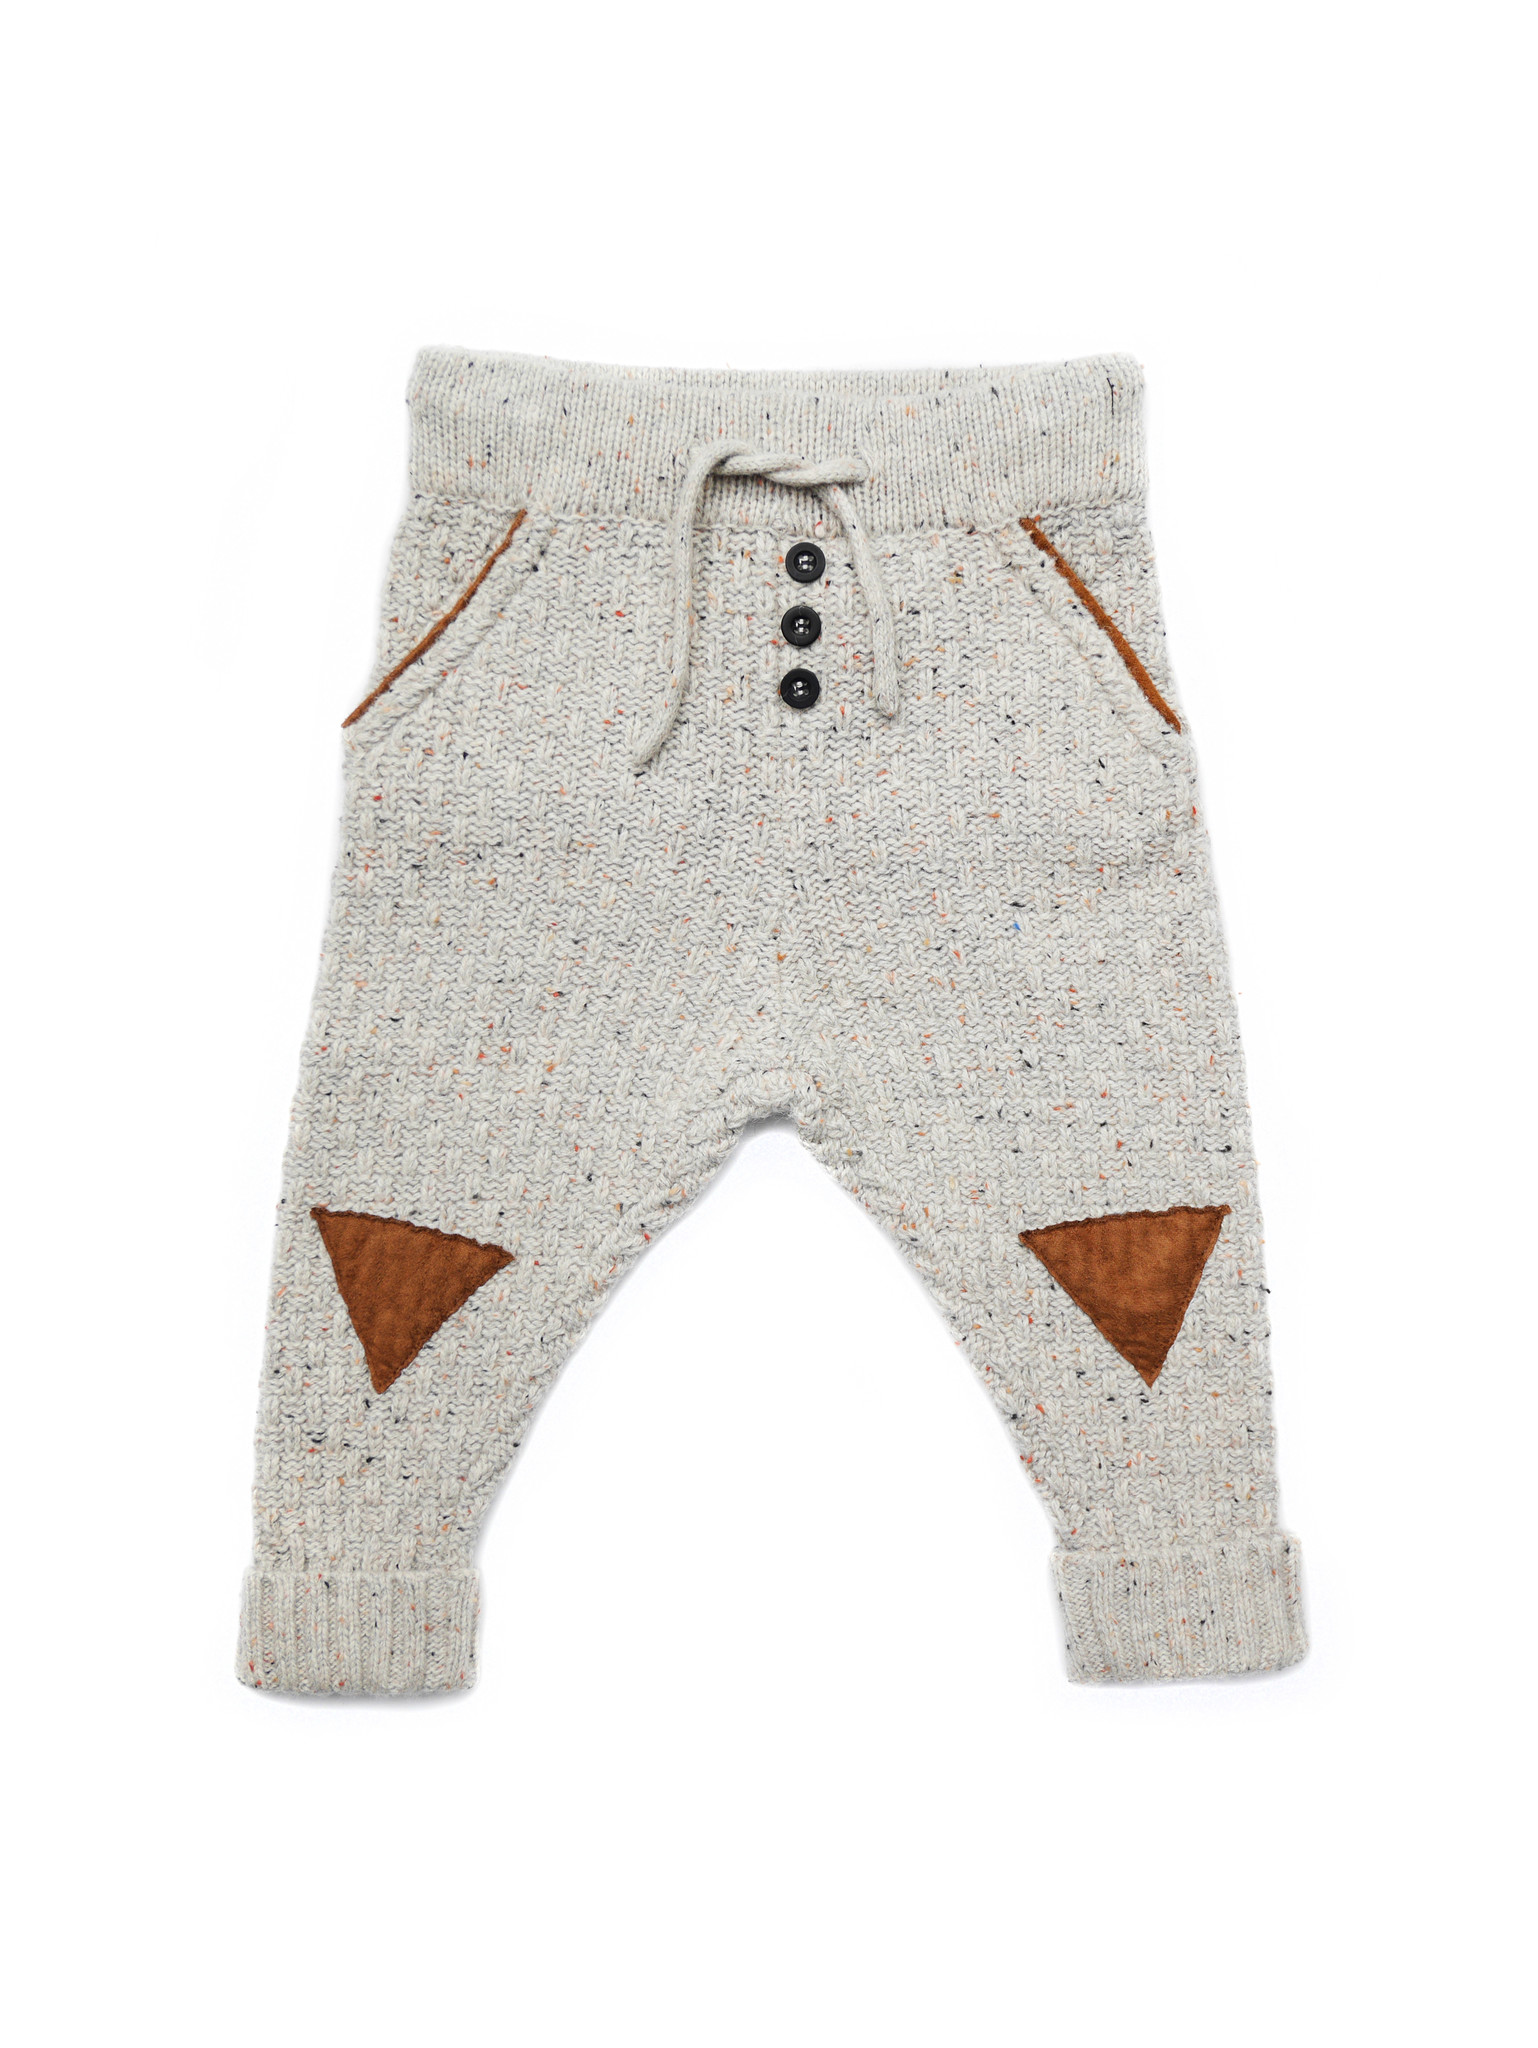 Sproet & Sprout ° Triangle knee patches - Light grey melange knit